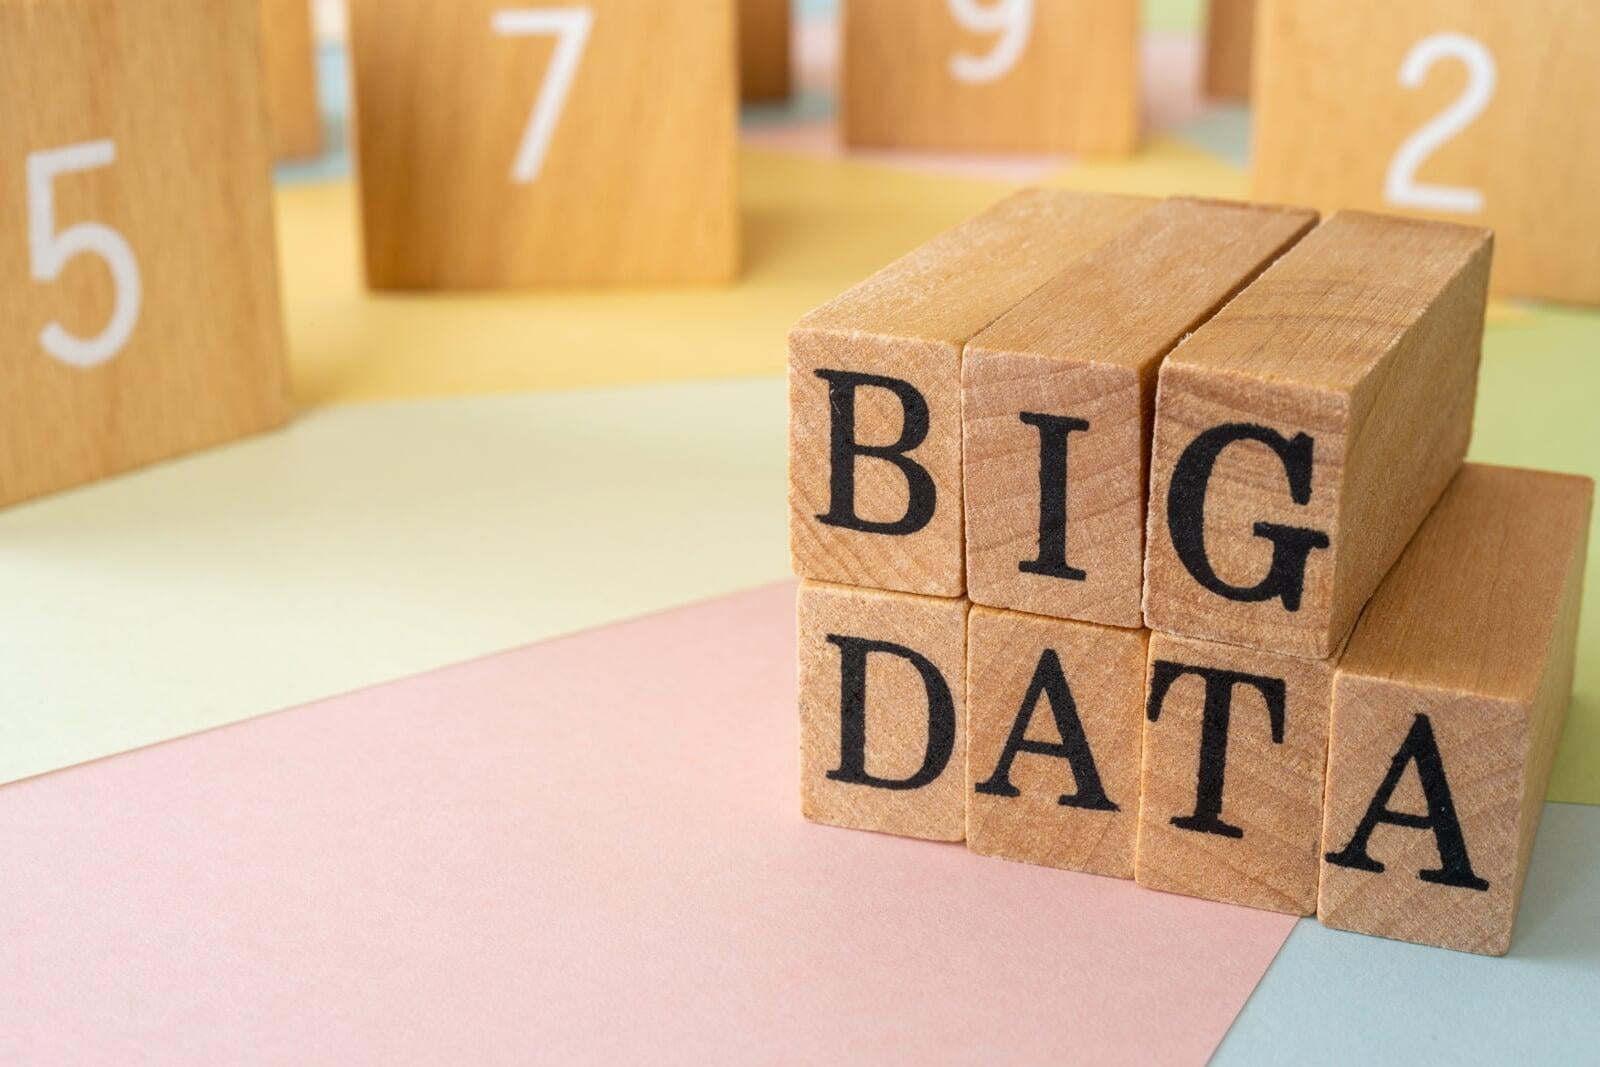 The Use of Big Data and Analytics in Decision Making